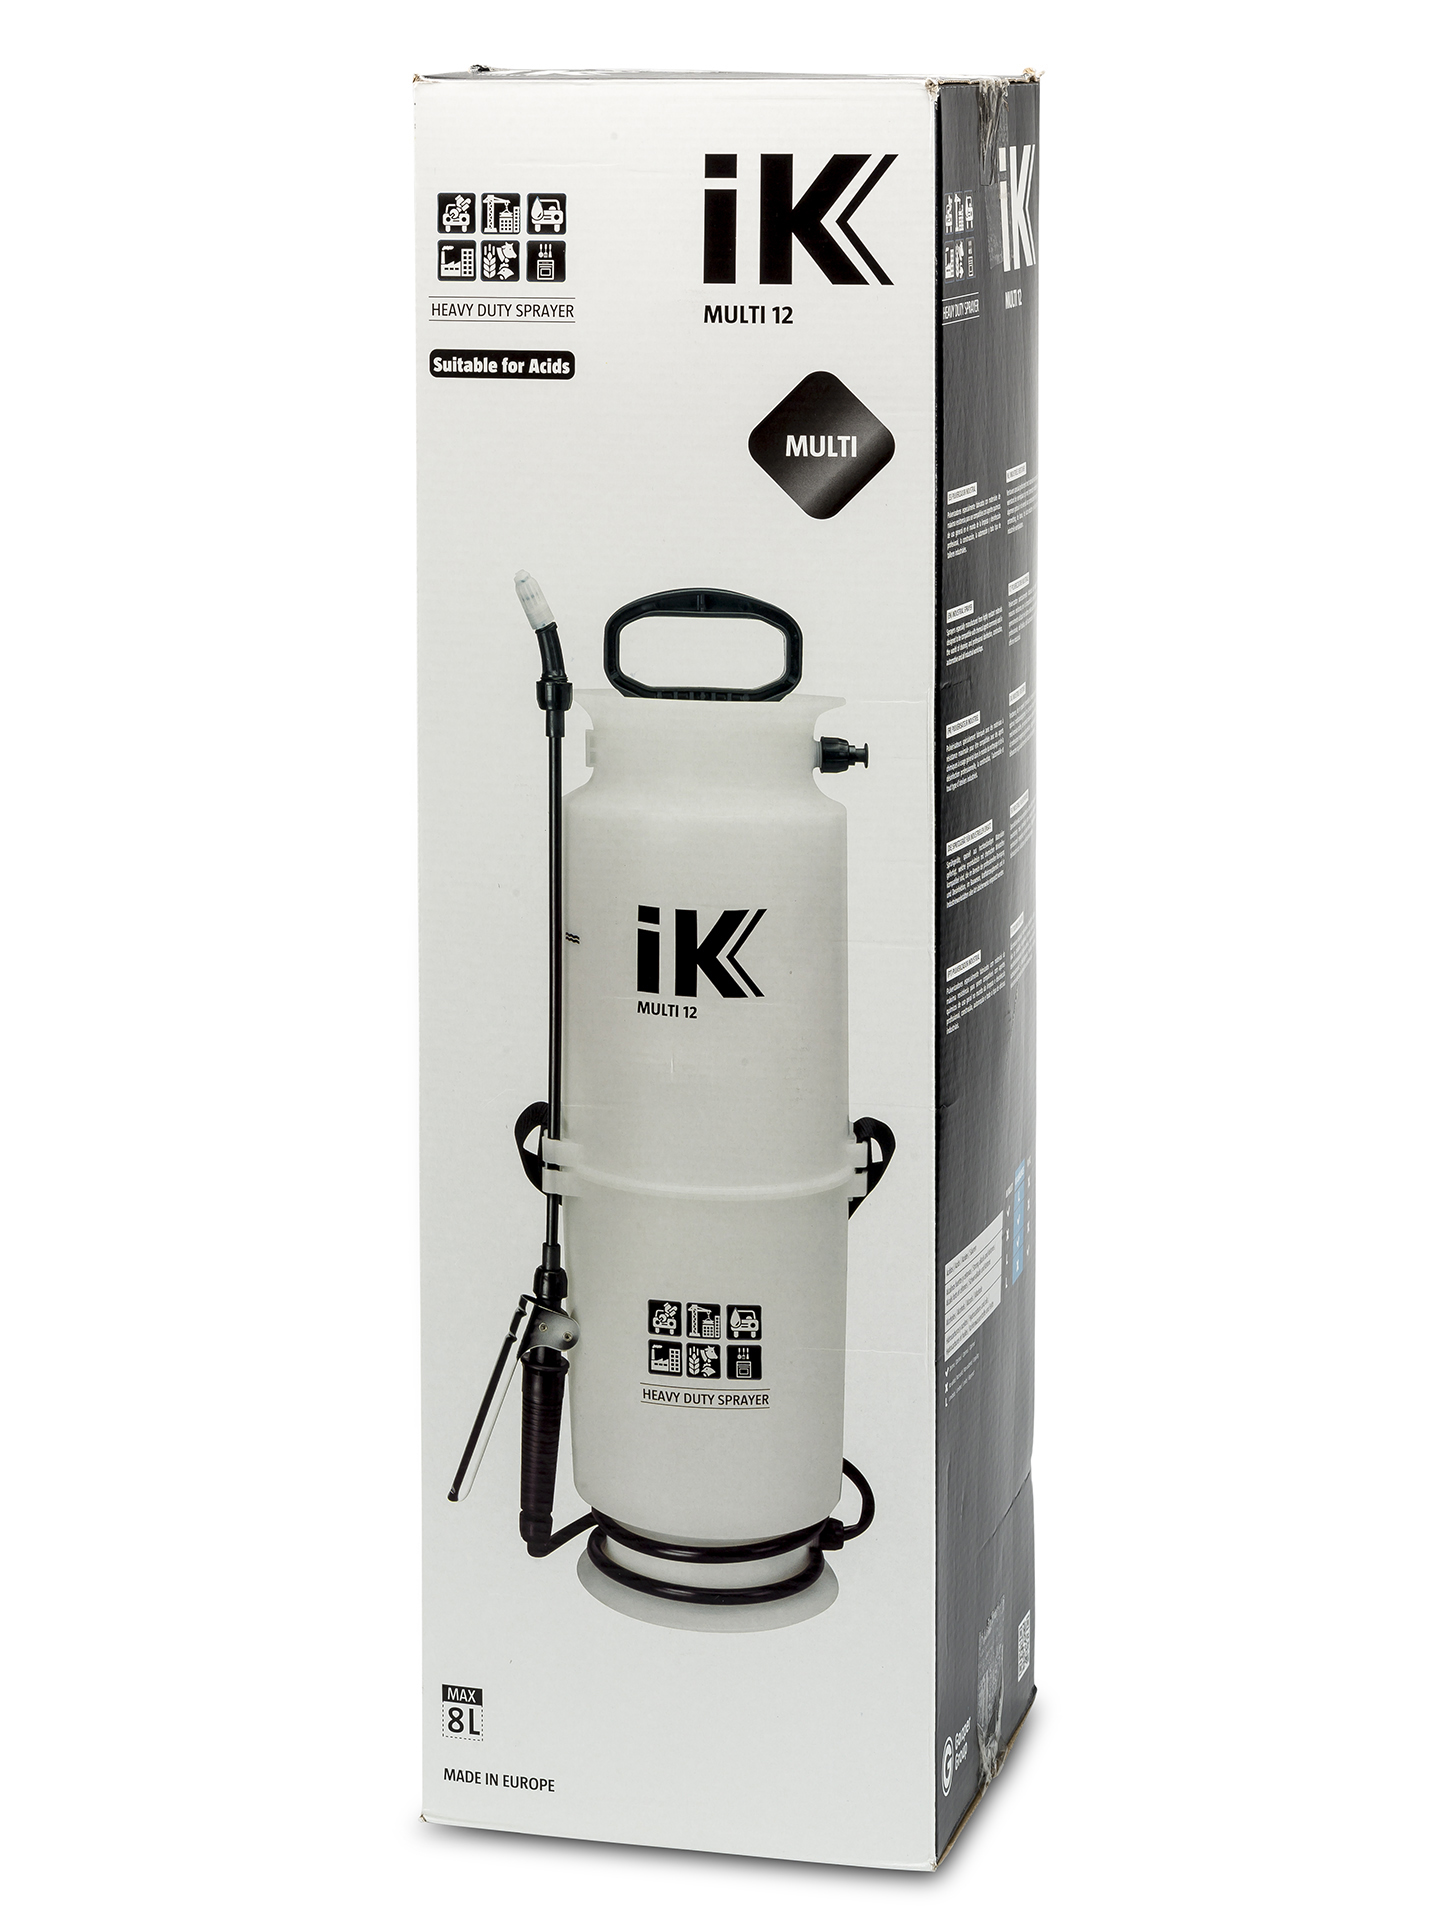 IK 12 Multi Industrial High Resistant Chemical Spray Bottle, AVCSL  Advanced Vehicle Cleaning Suppliers Ltd